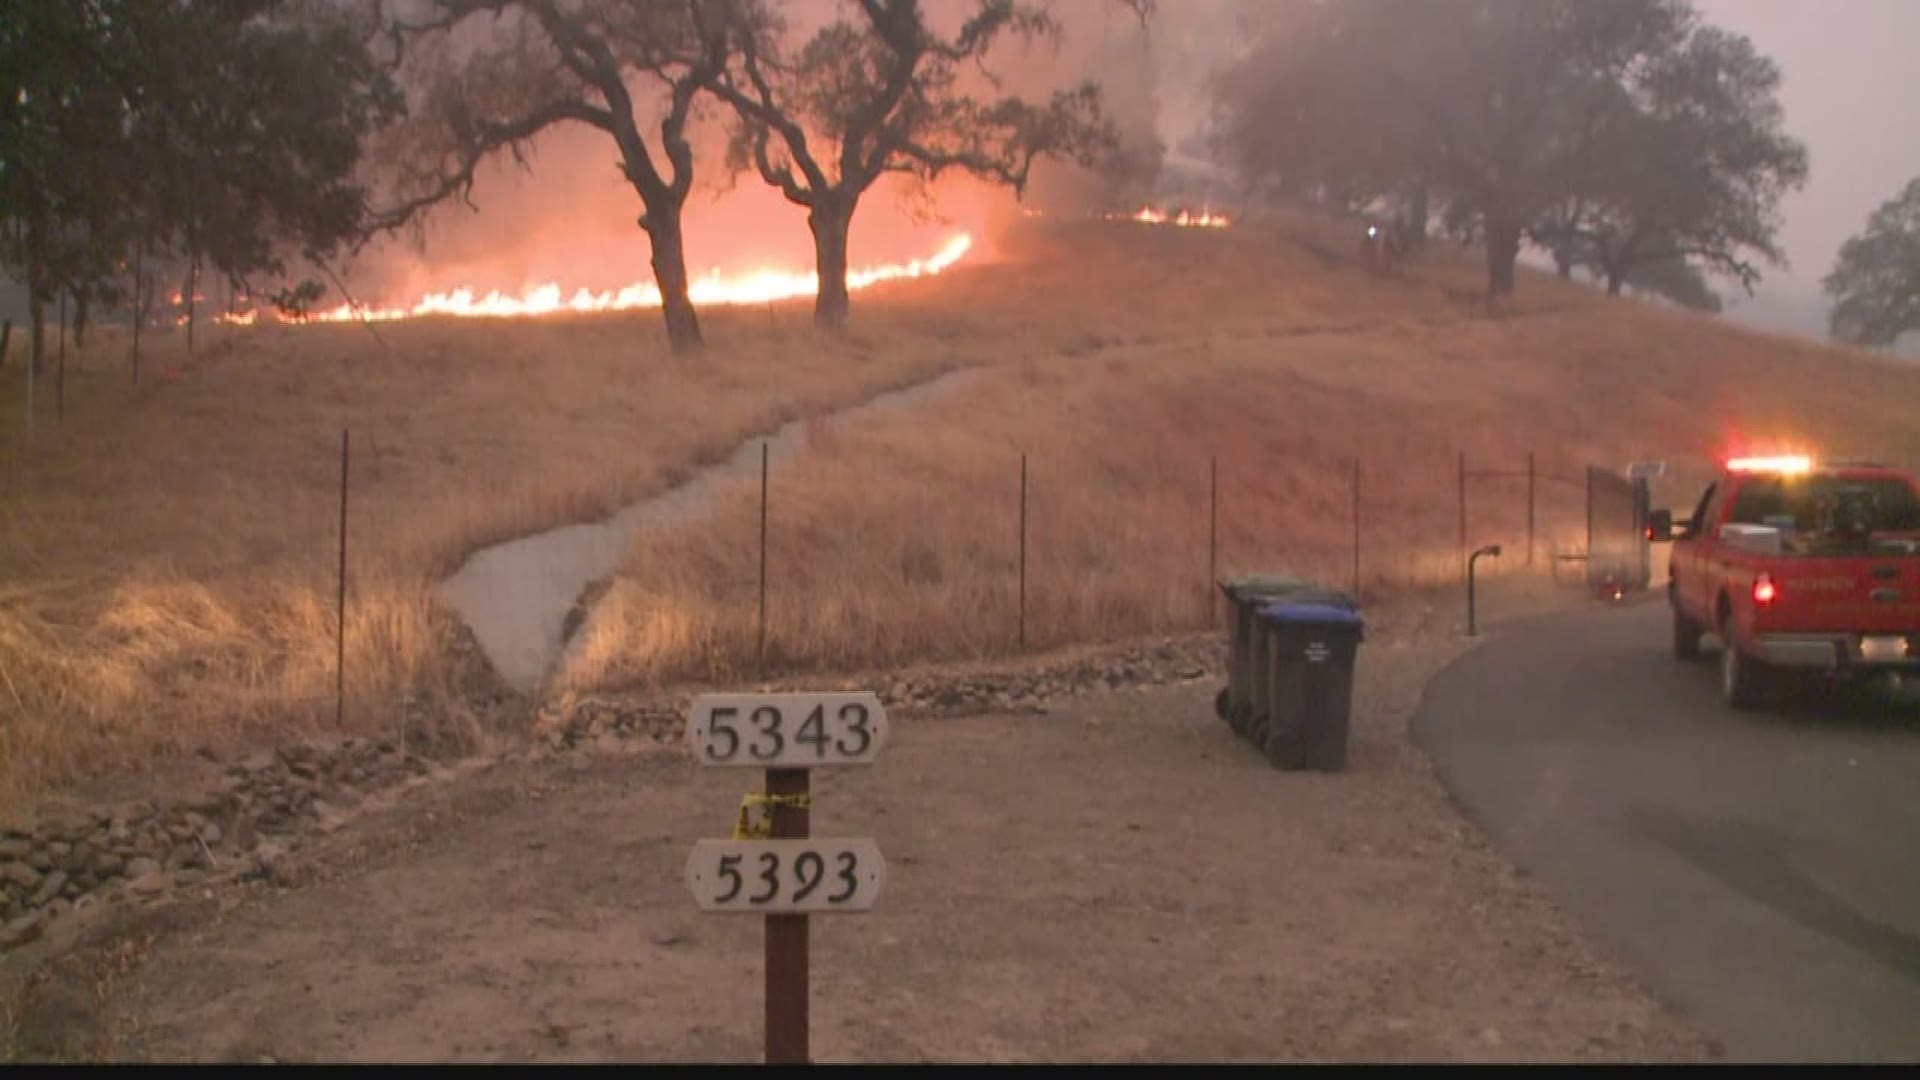 The Atlas Fire is moving south, forcing residents in Solano County to evacuate.